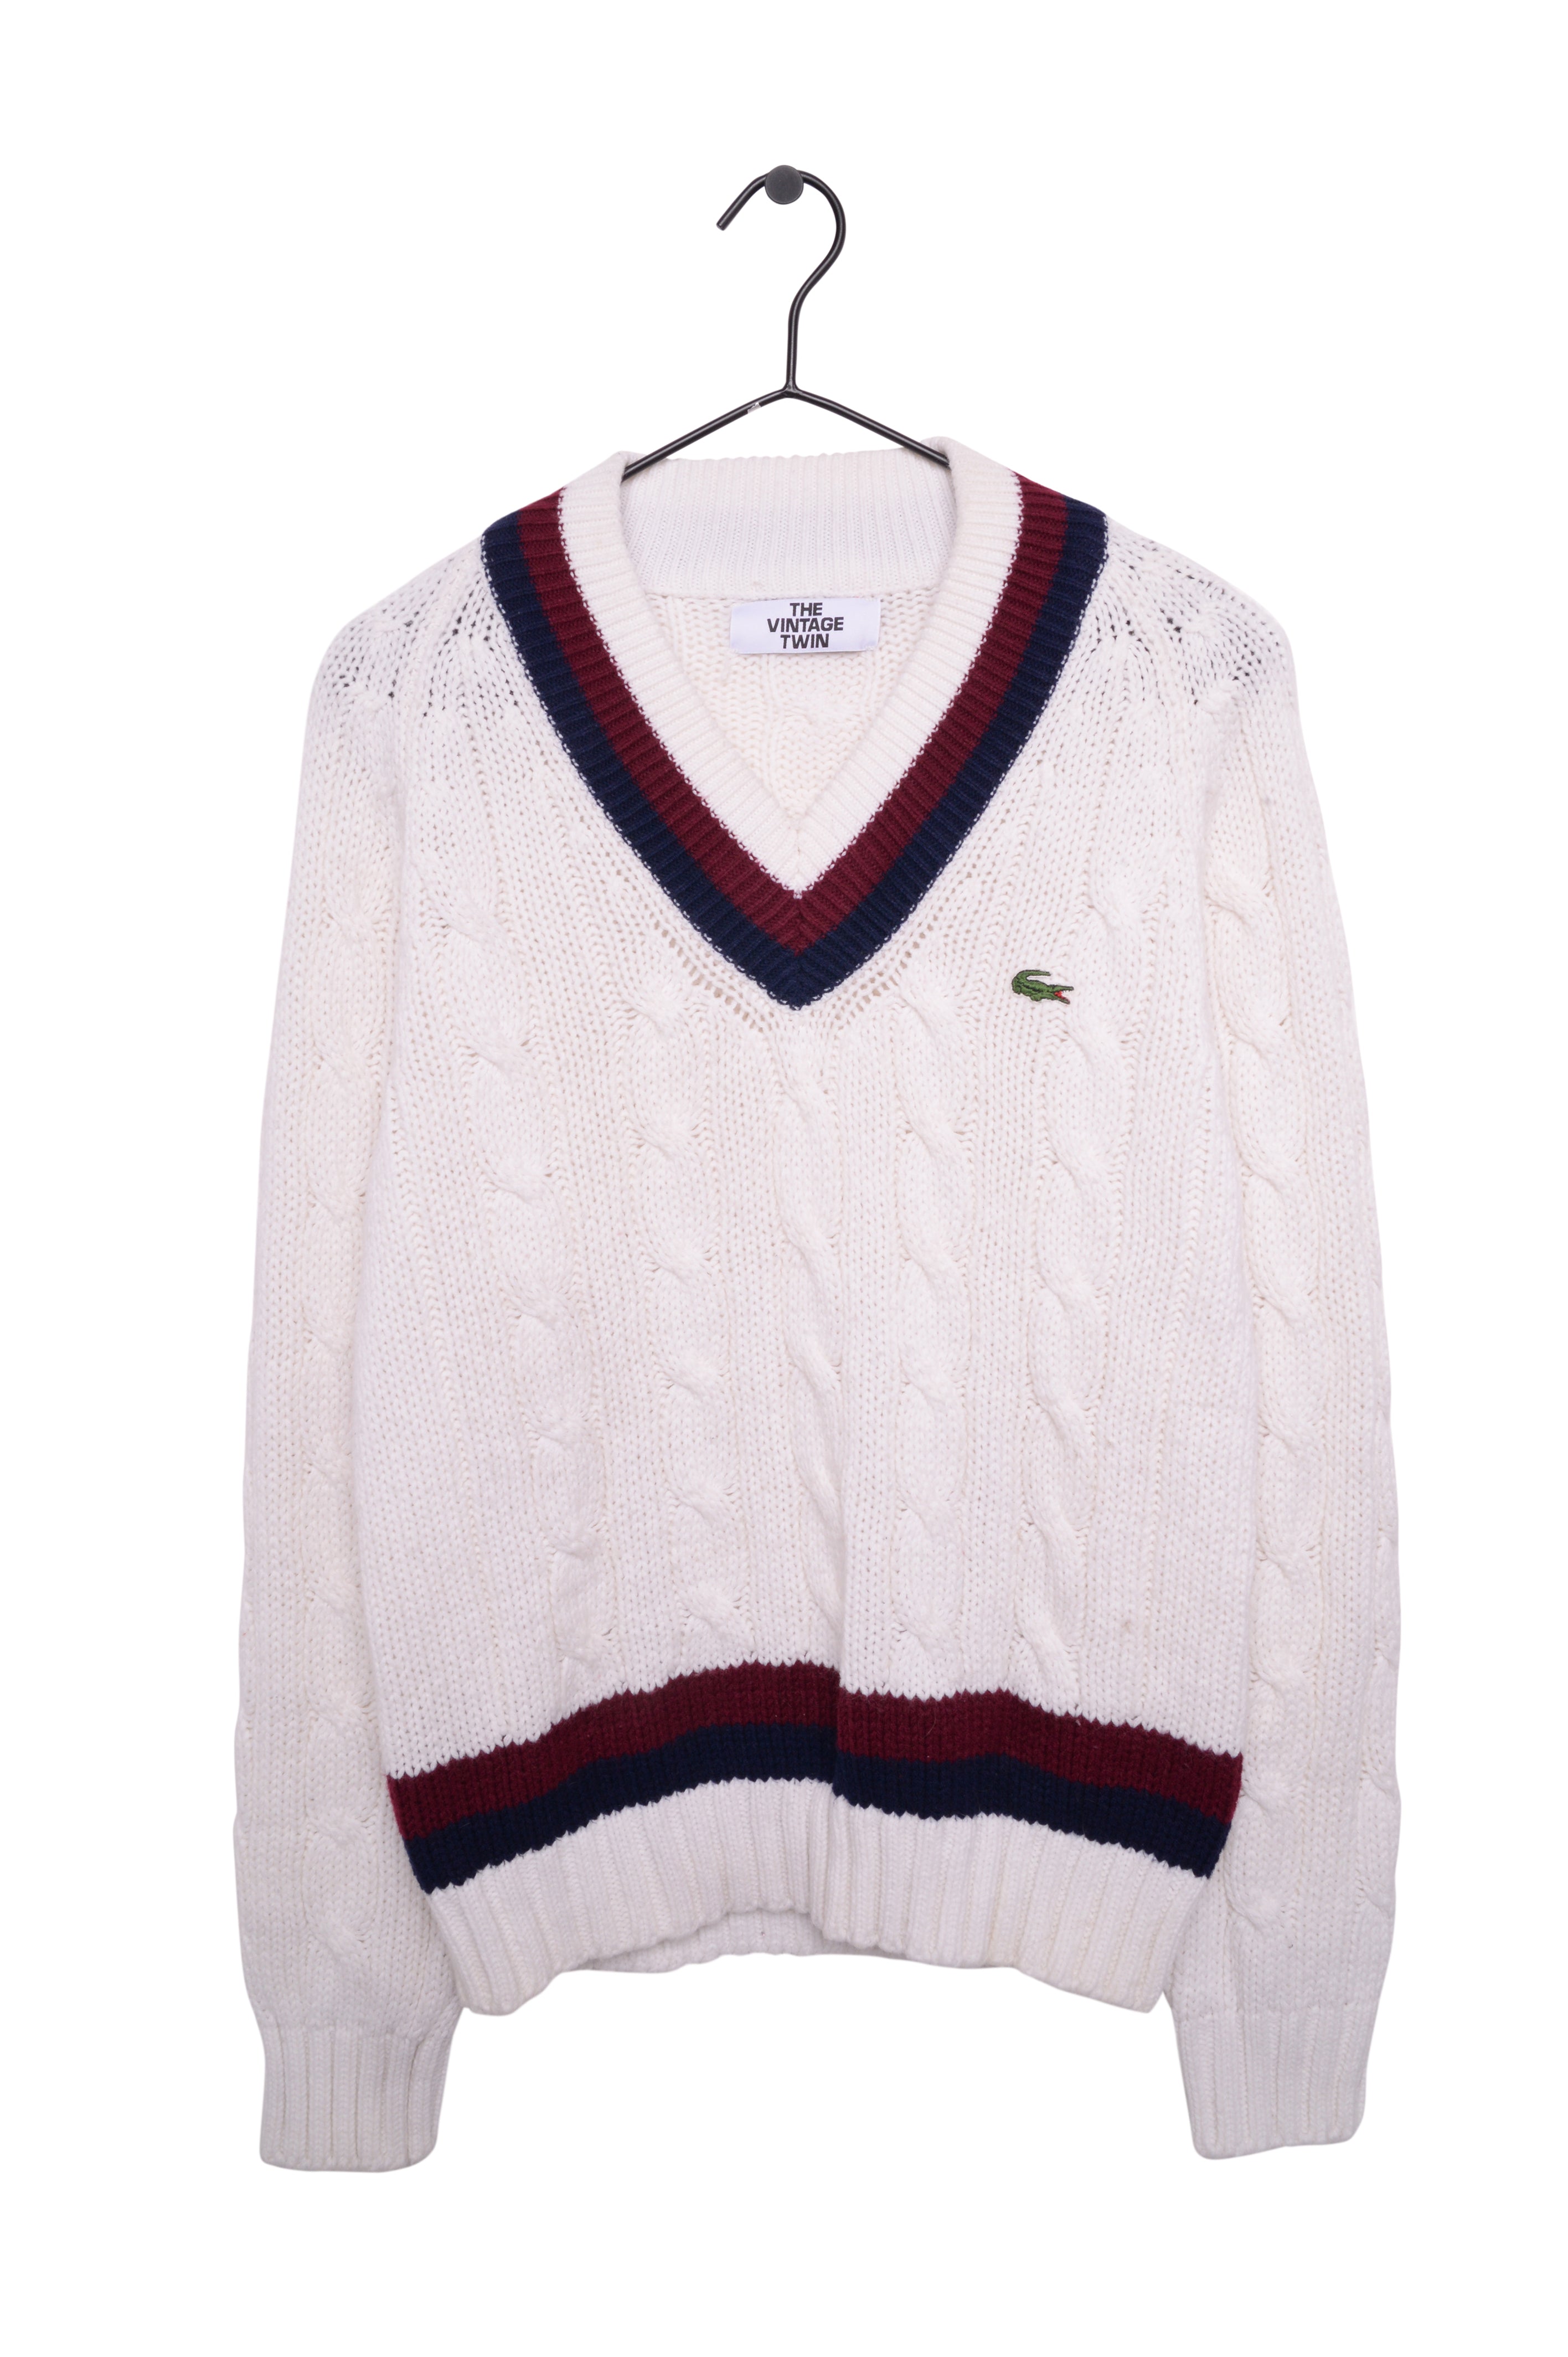 Lacoste Knit Sweater Free Shipping - The Vintage Twin